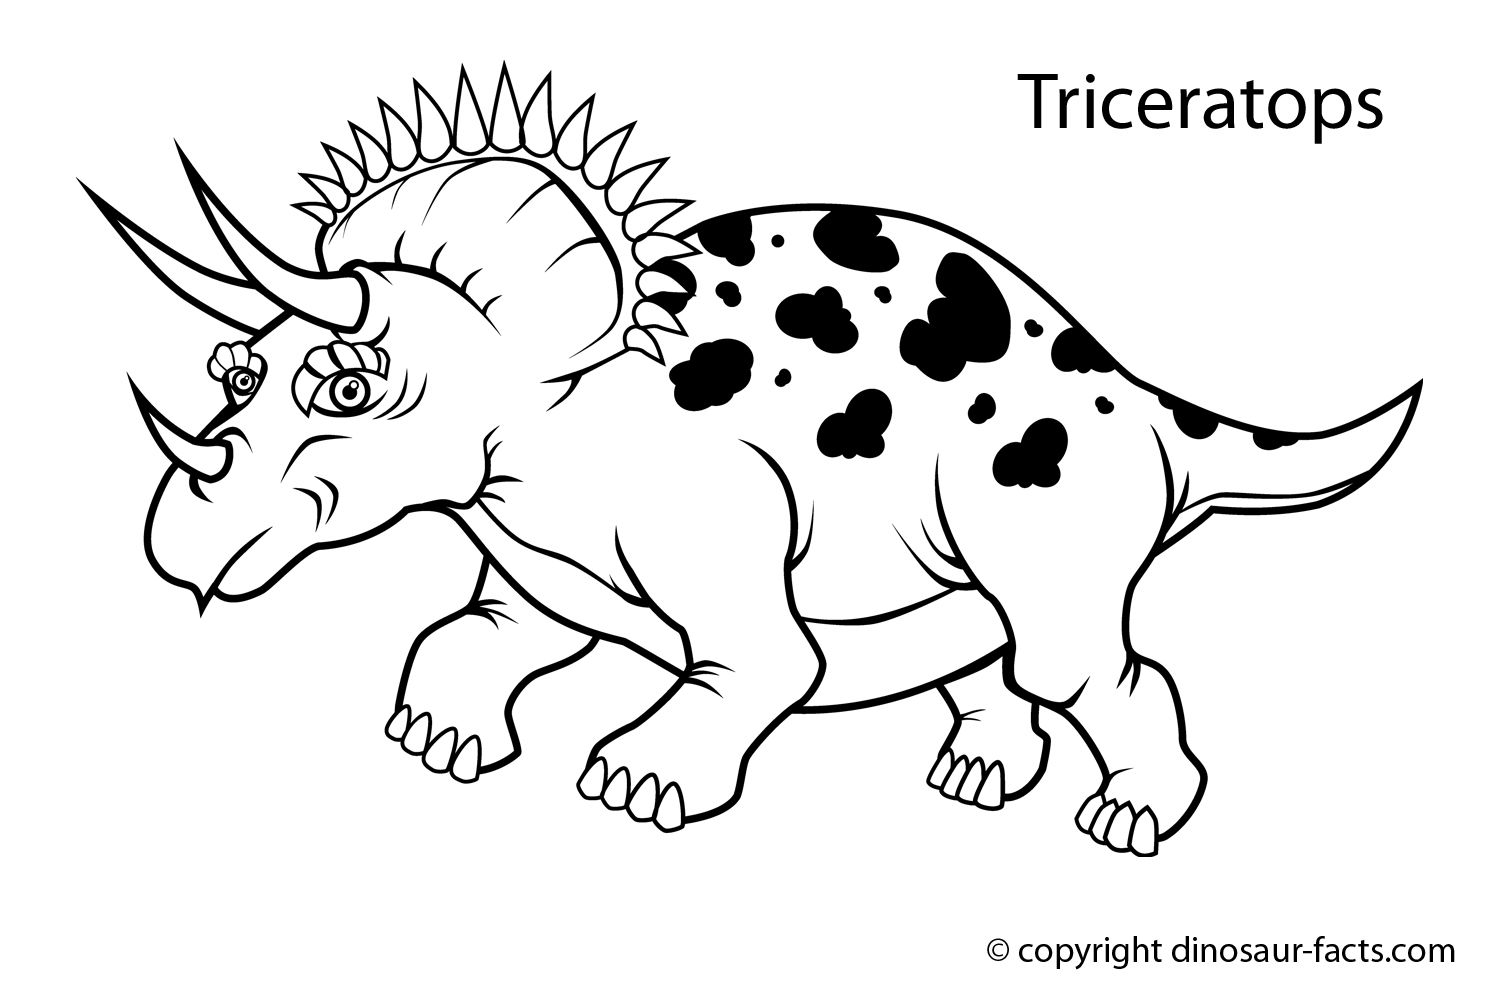 Ice Age 3 Dinosaur Coloring Pages | Cooloring.com